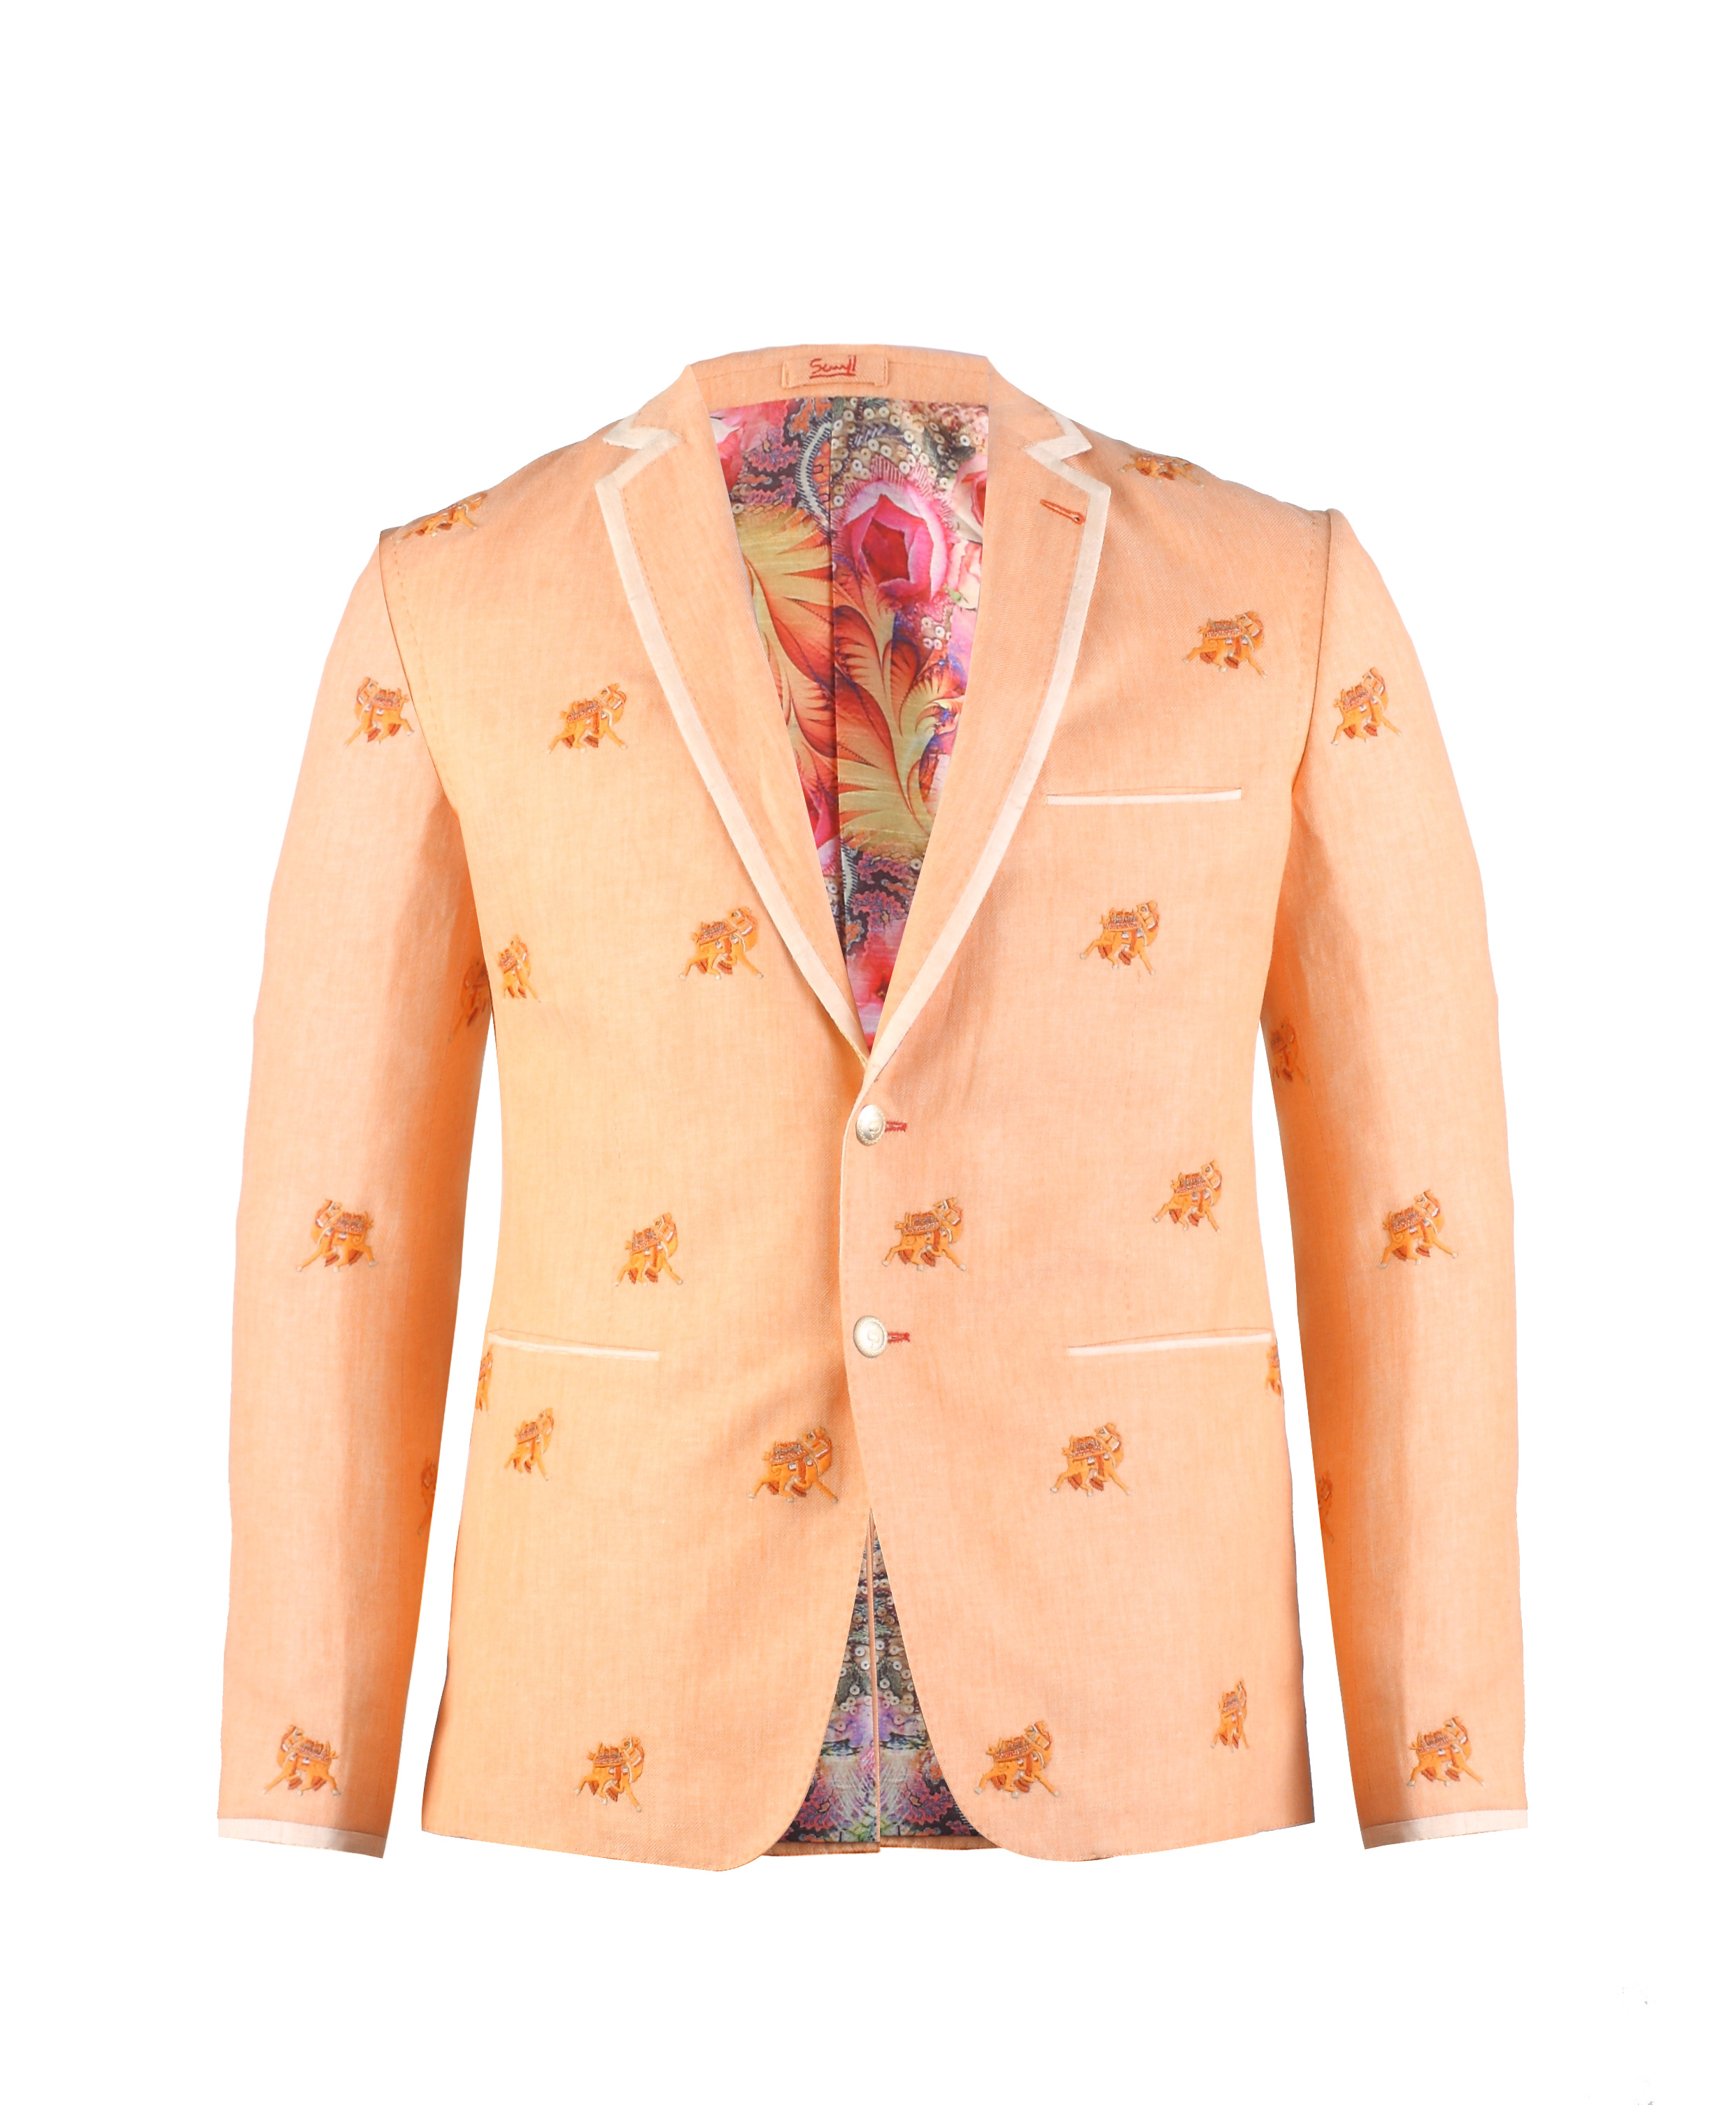 Figurative emroidered jacket- camel motif associated with wedding ceremonies from House of Sunil Mehra